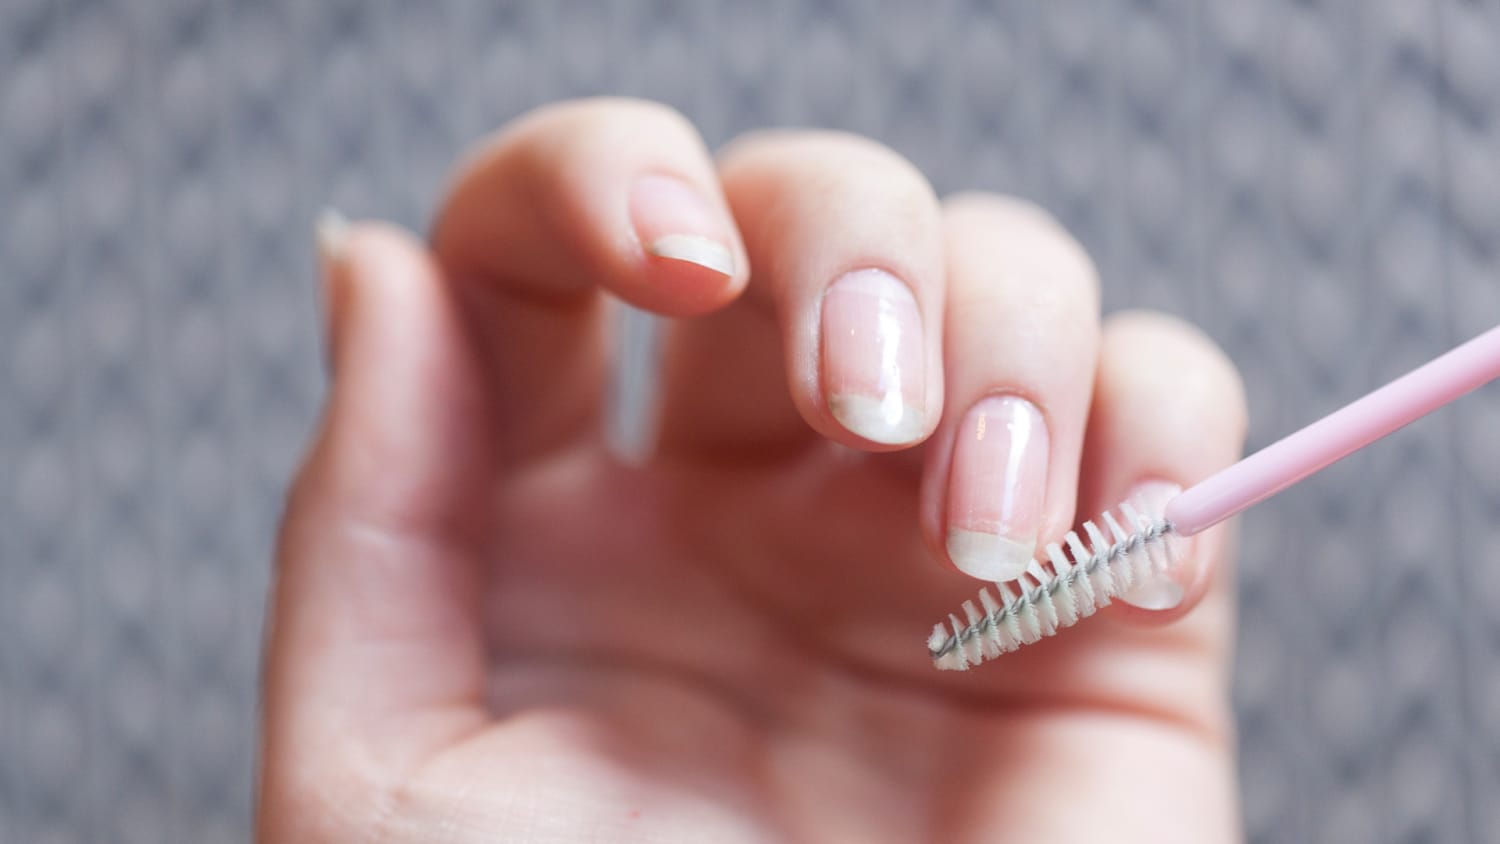 How to clean under your nails (without ruining your manicure)